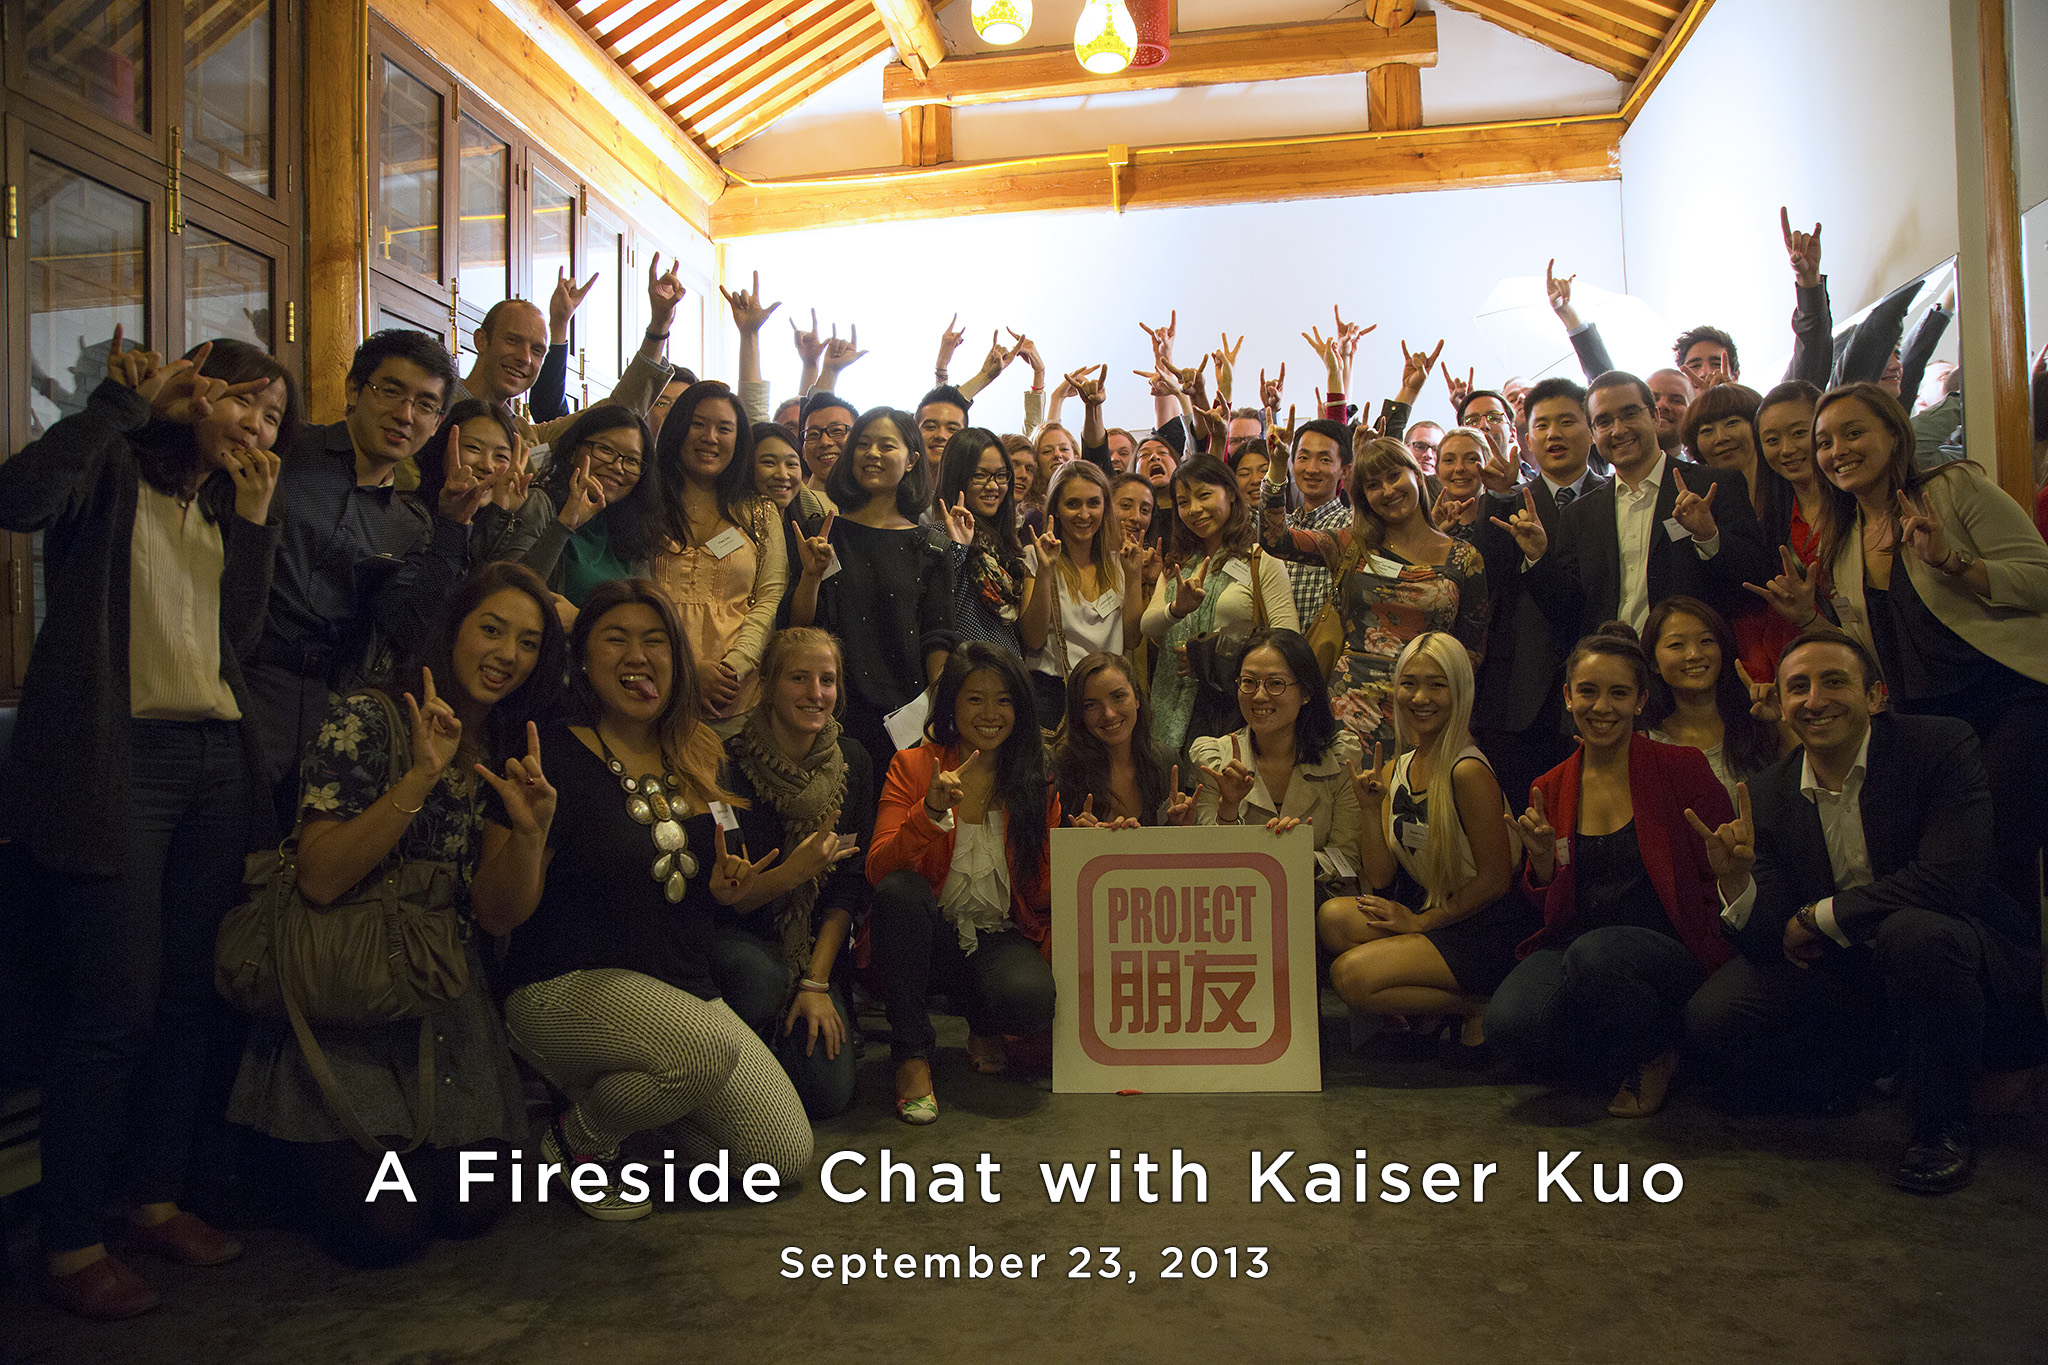 A Fireside Chat with Kaiser Kuo